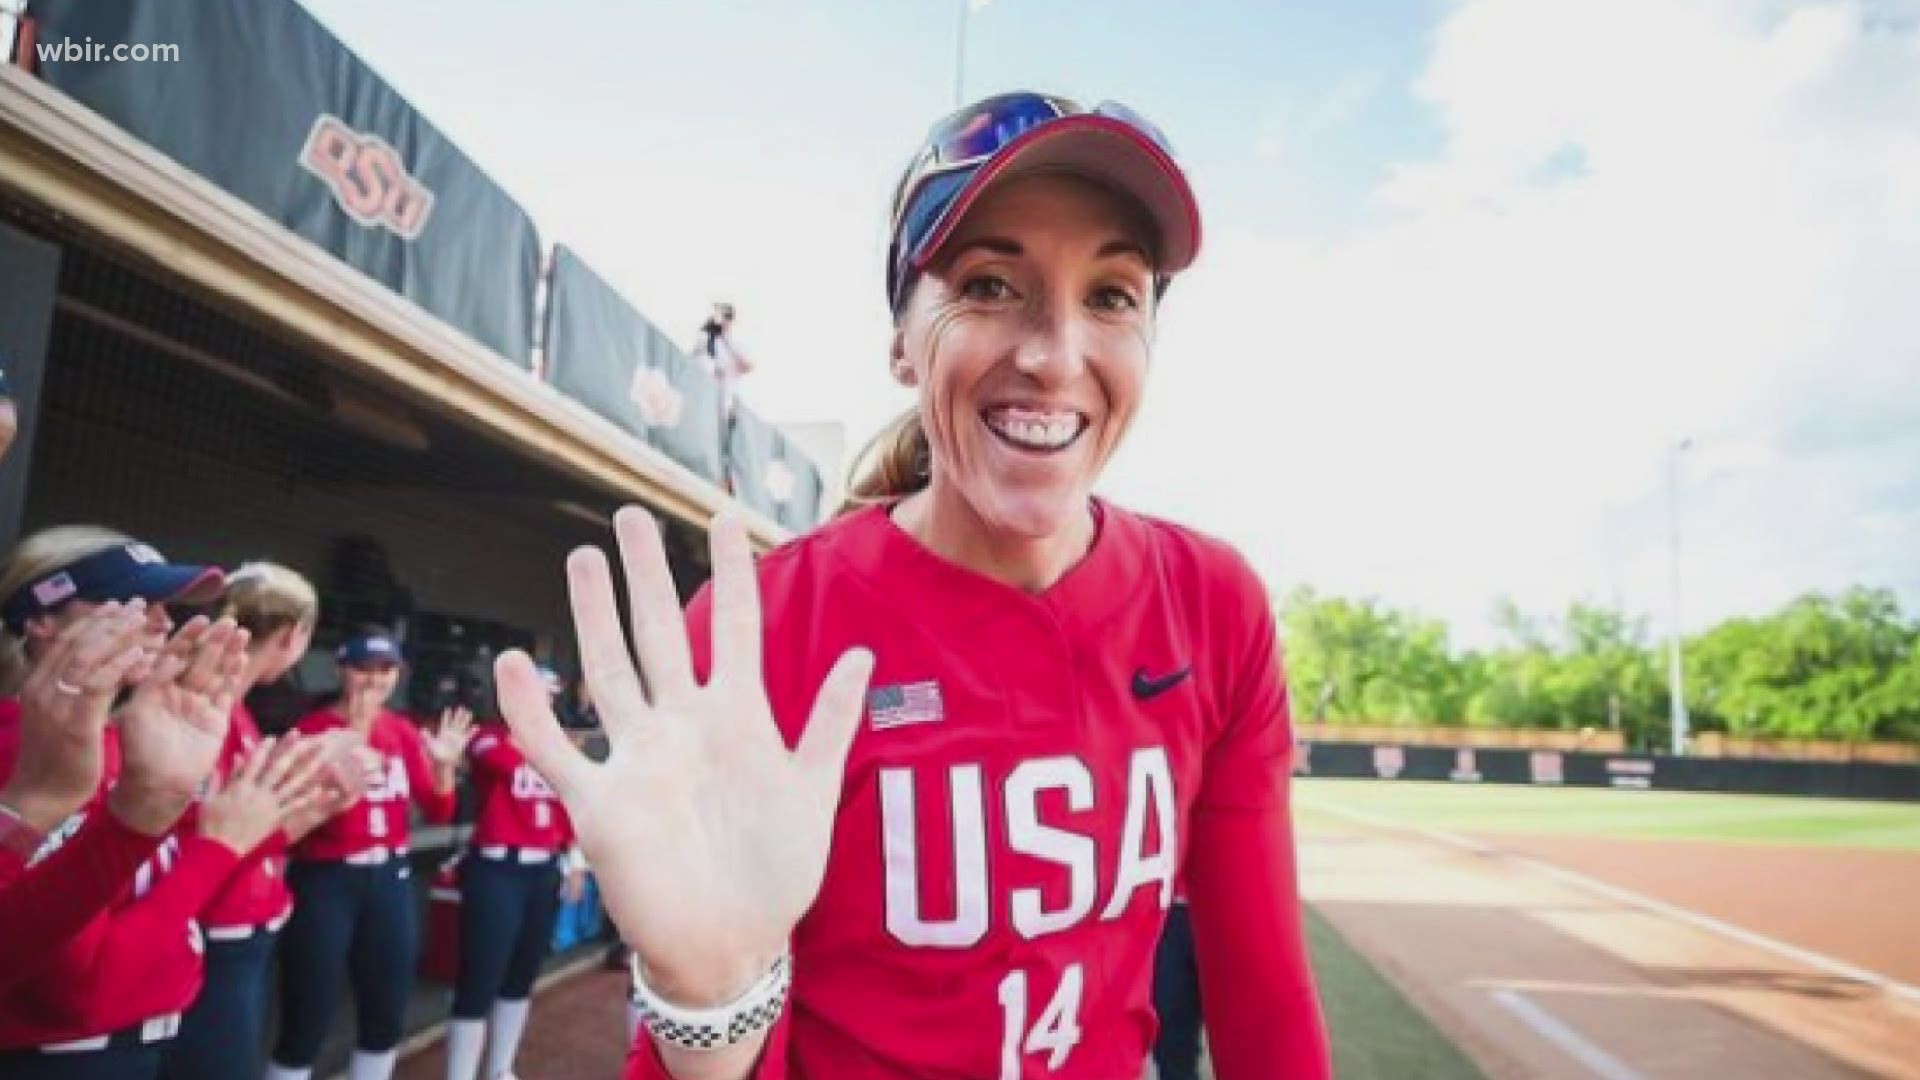 Abbott said the 2008 Olympics were a blur for her. Now she's excited to help Women's Softball continue grow as she competes in Tokyo.